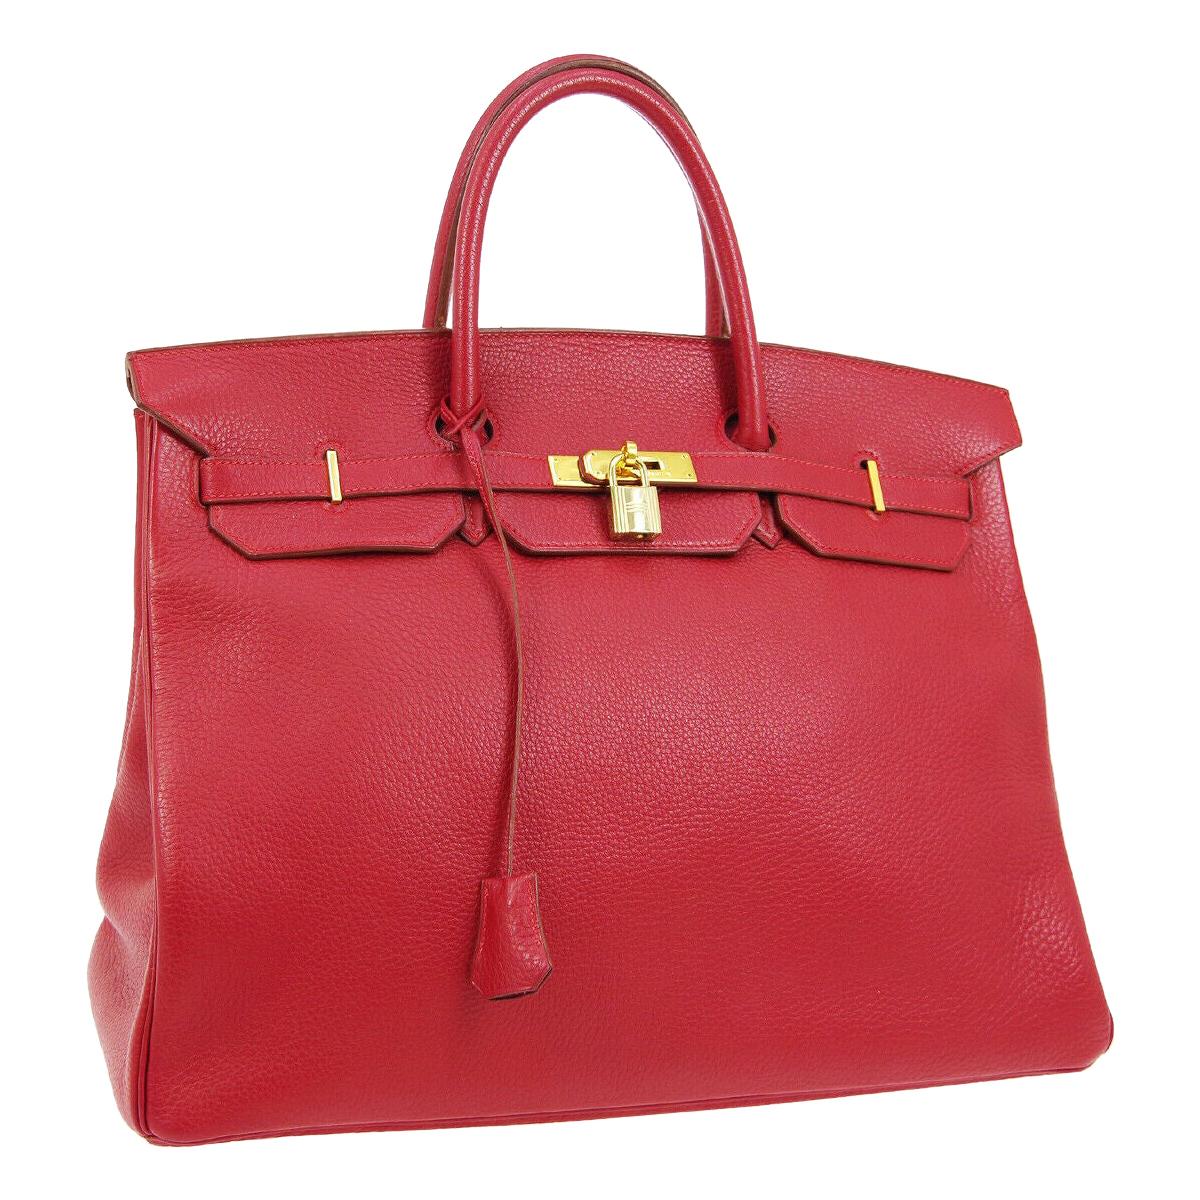 Hermes Birkin 40 Red Leather Gold Travel Carryall Top Handle Satchel Tote